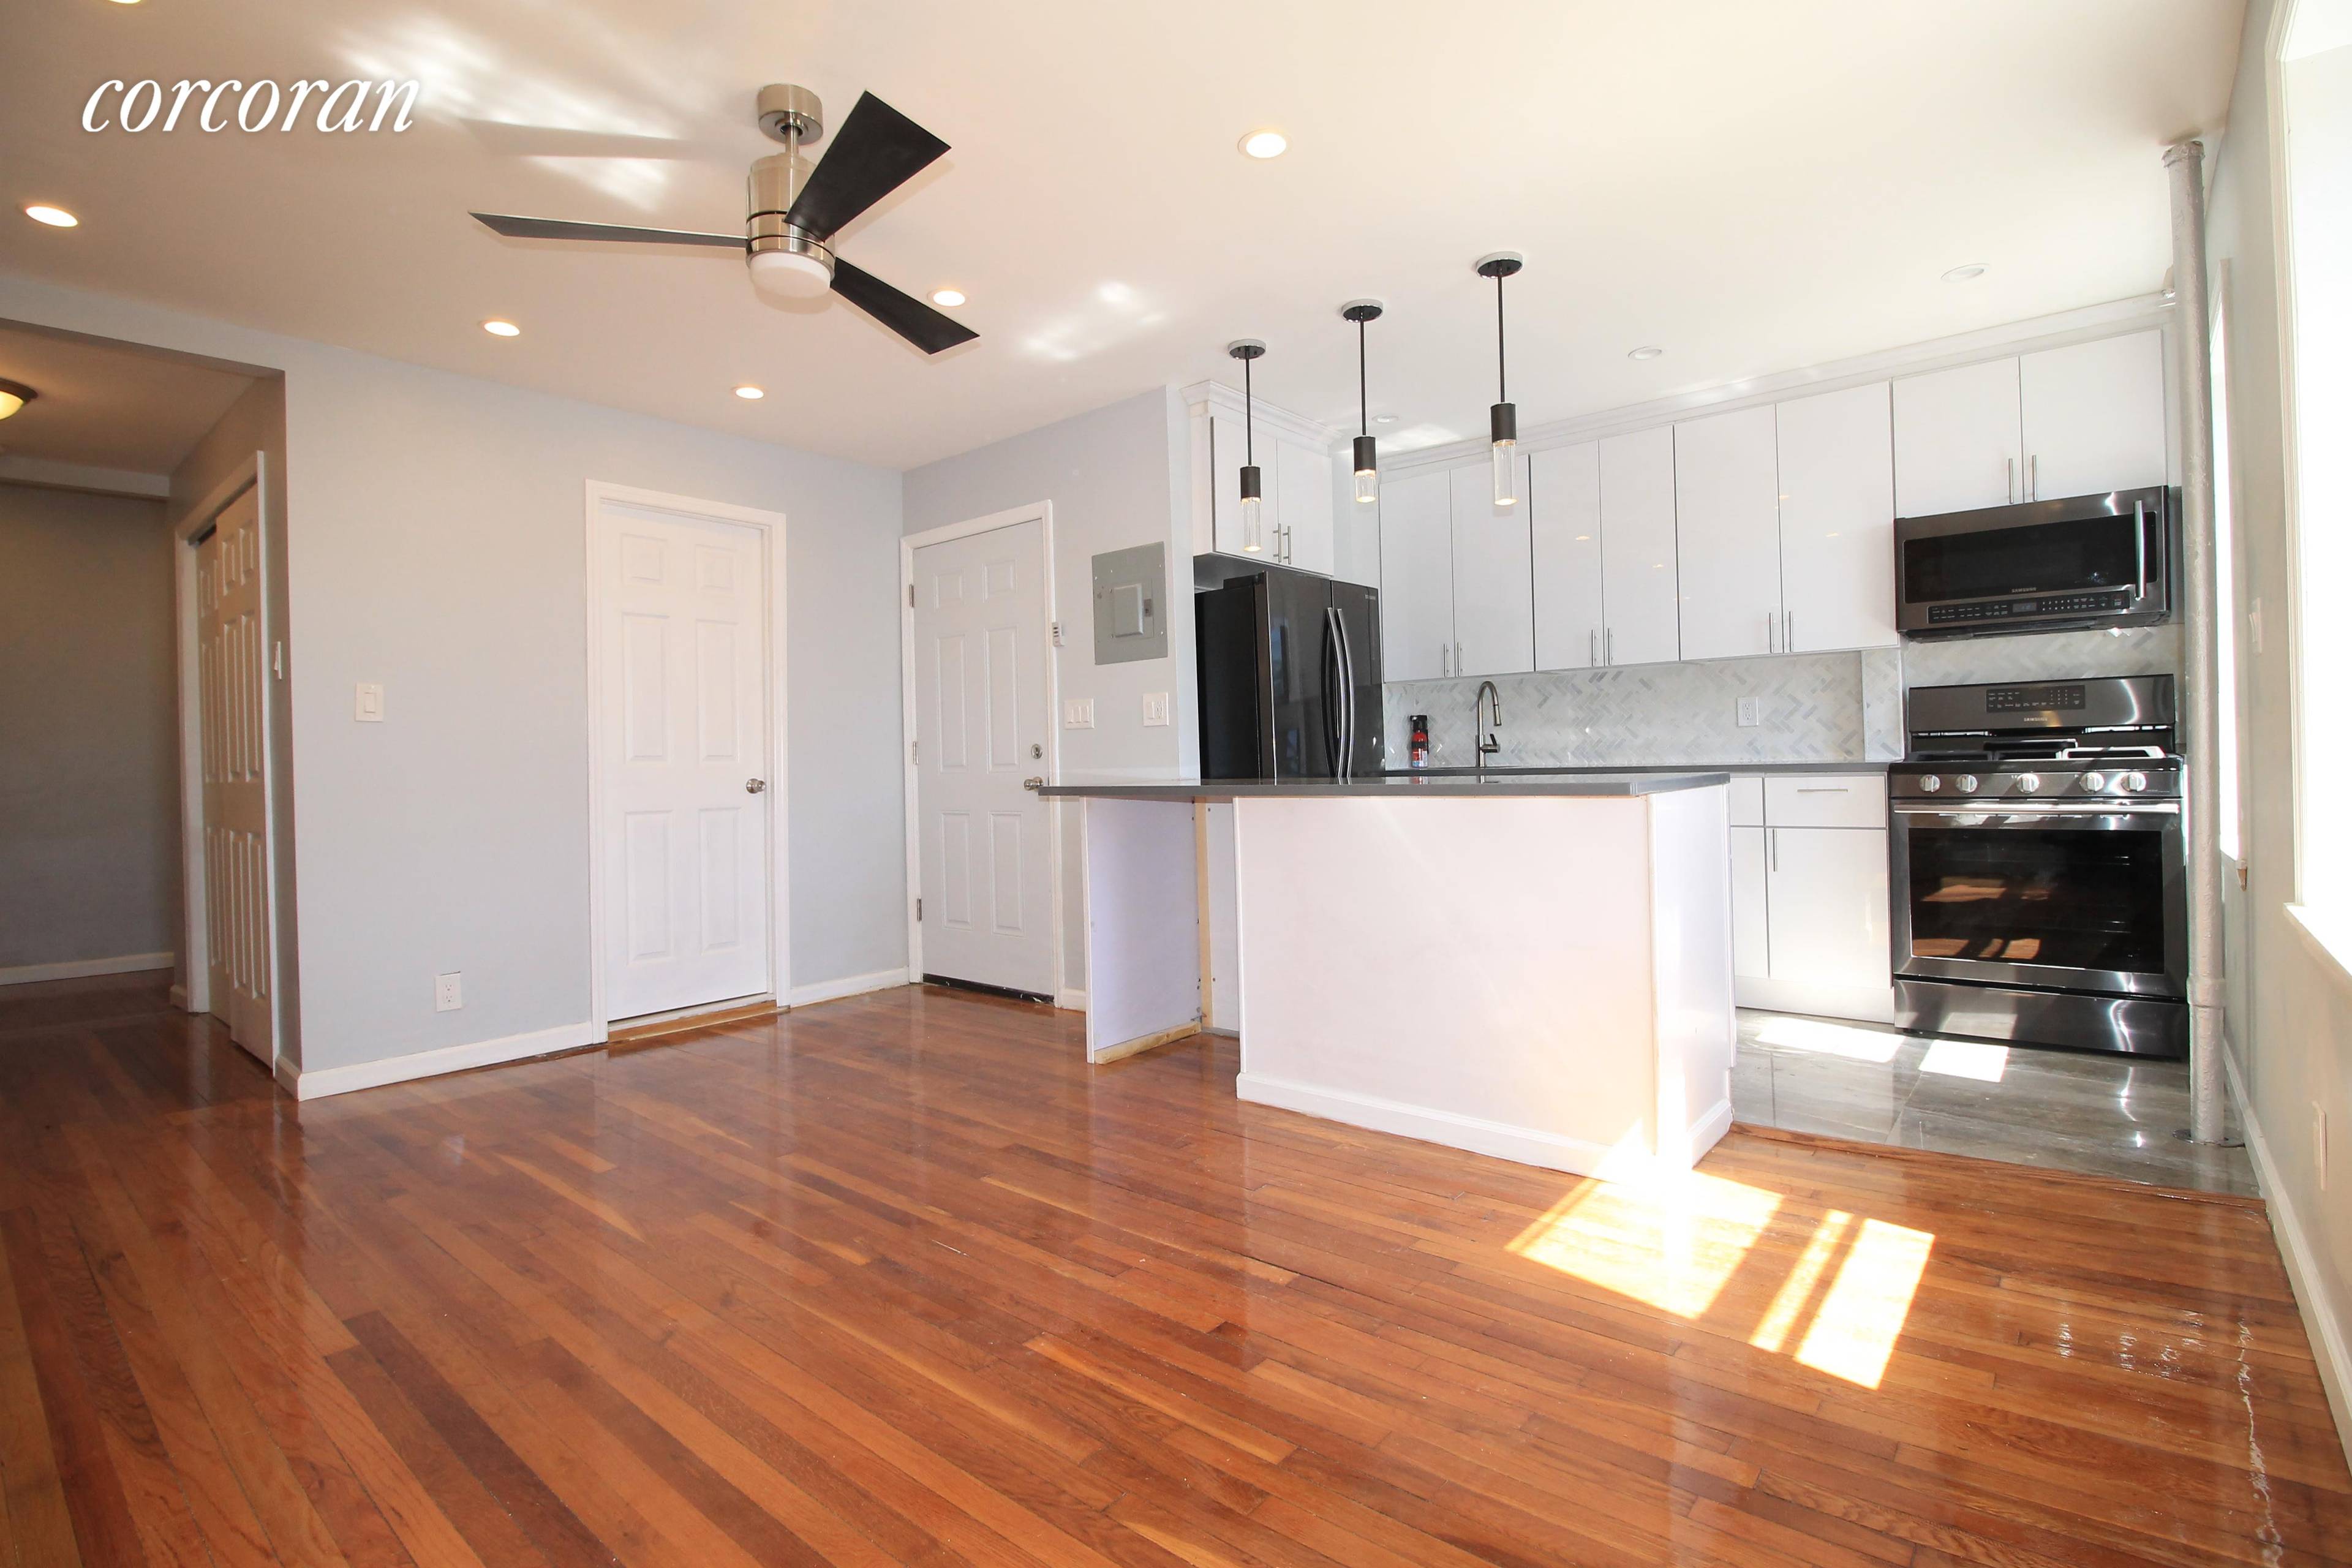 This newly renovated 2BR 1BA floor through apartment is located on a bucolic block in beautiful Bedford Stuyvesant, Brooklyn.